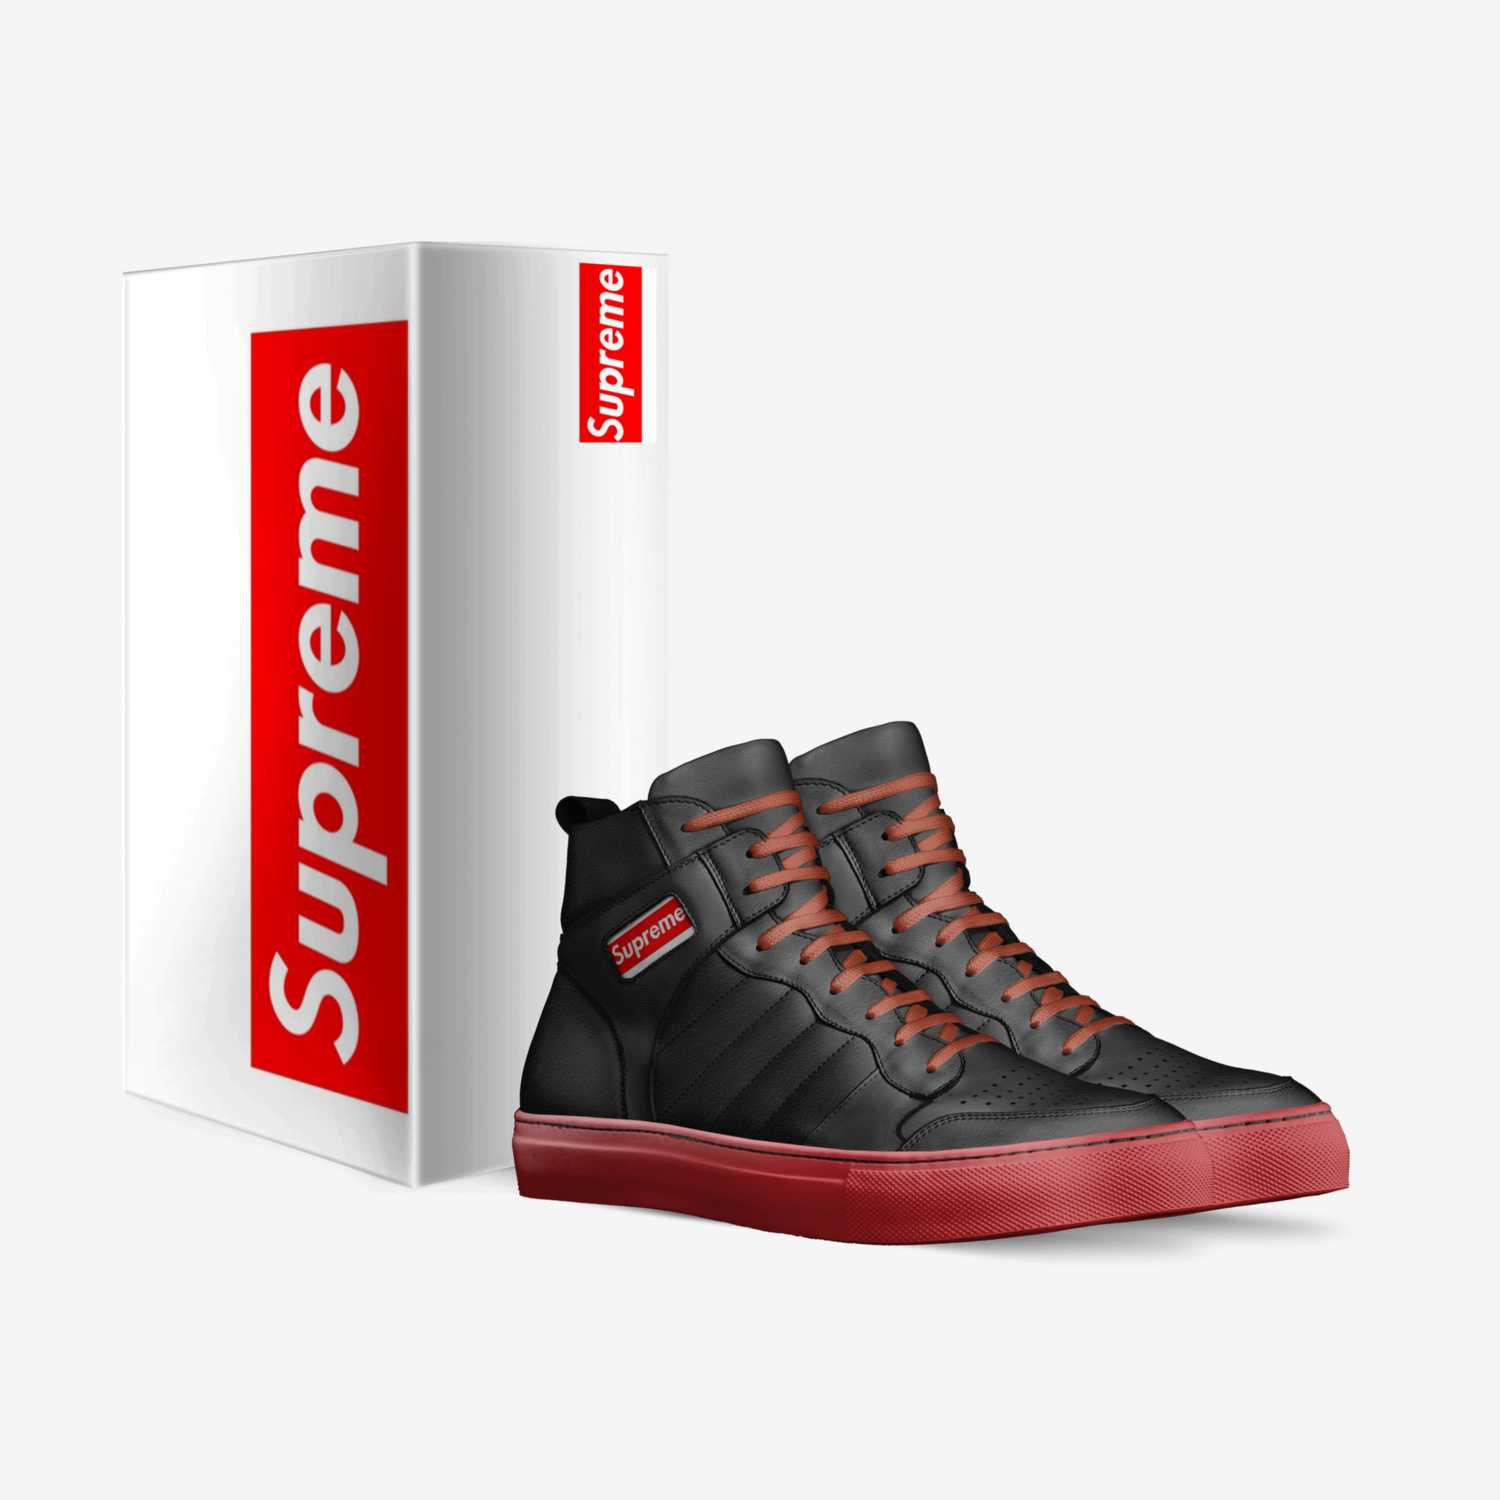 SumpterX1 custom made in Italy shoes by Isaac Sumpter | Box view